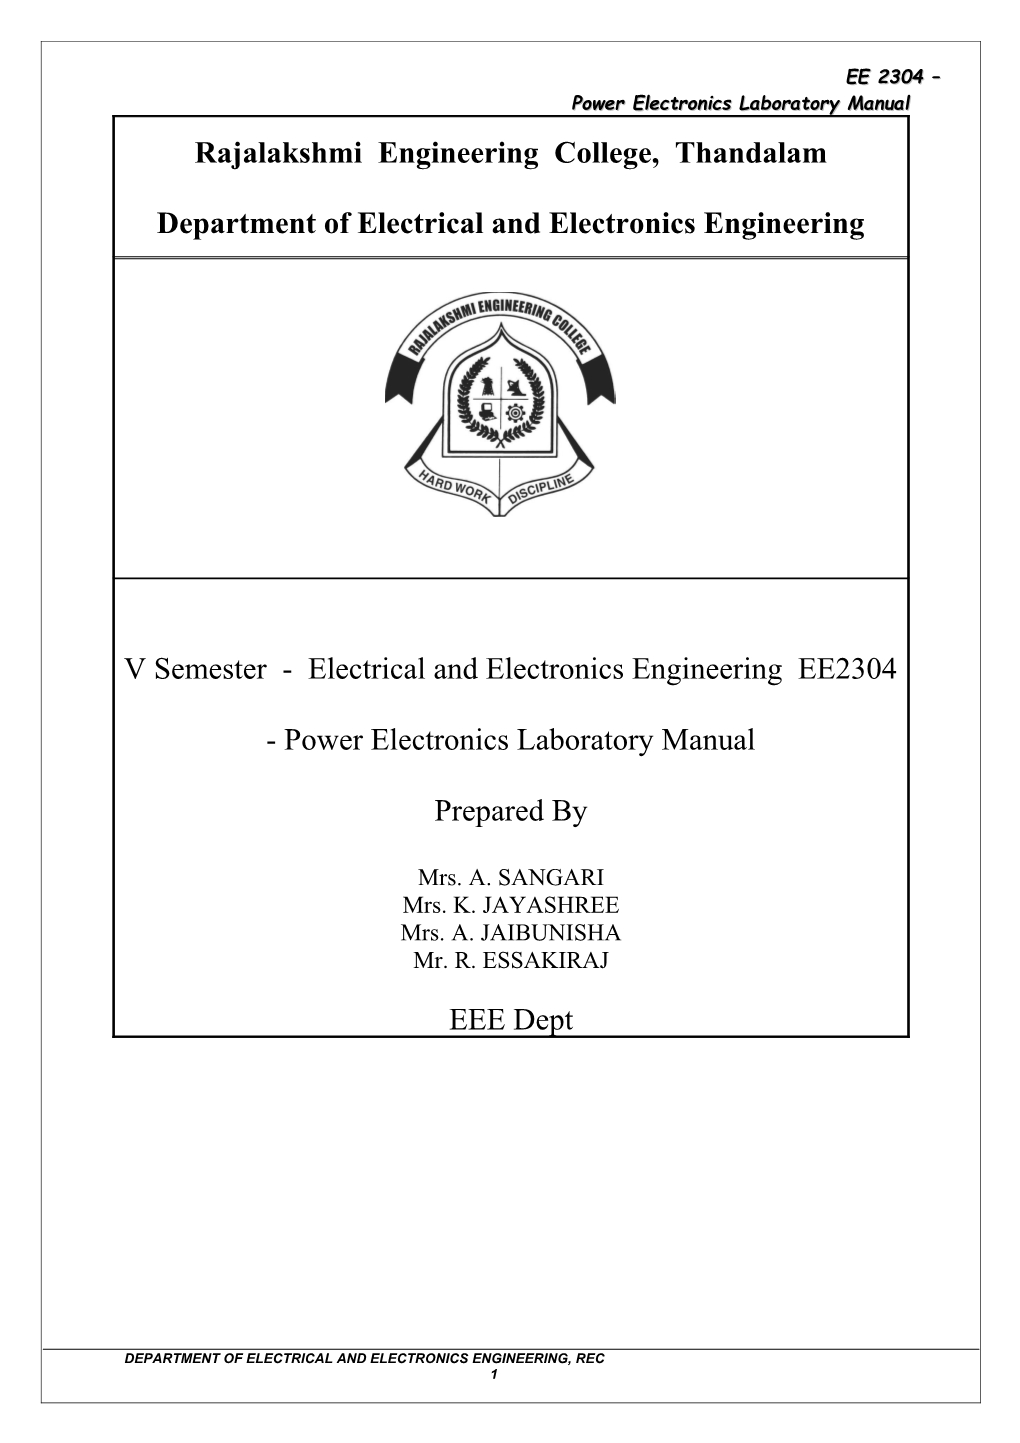 General Instructions to Students for EEE Lab Courses